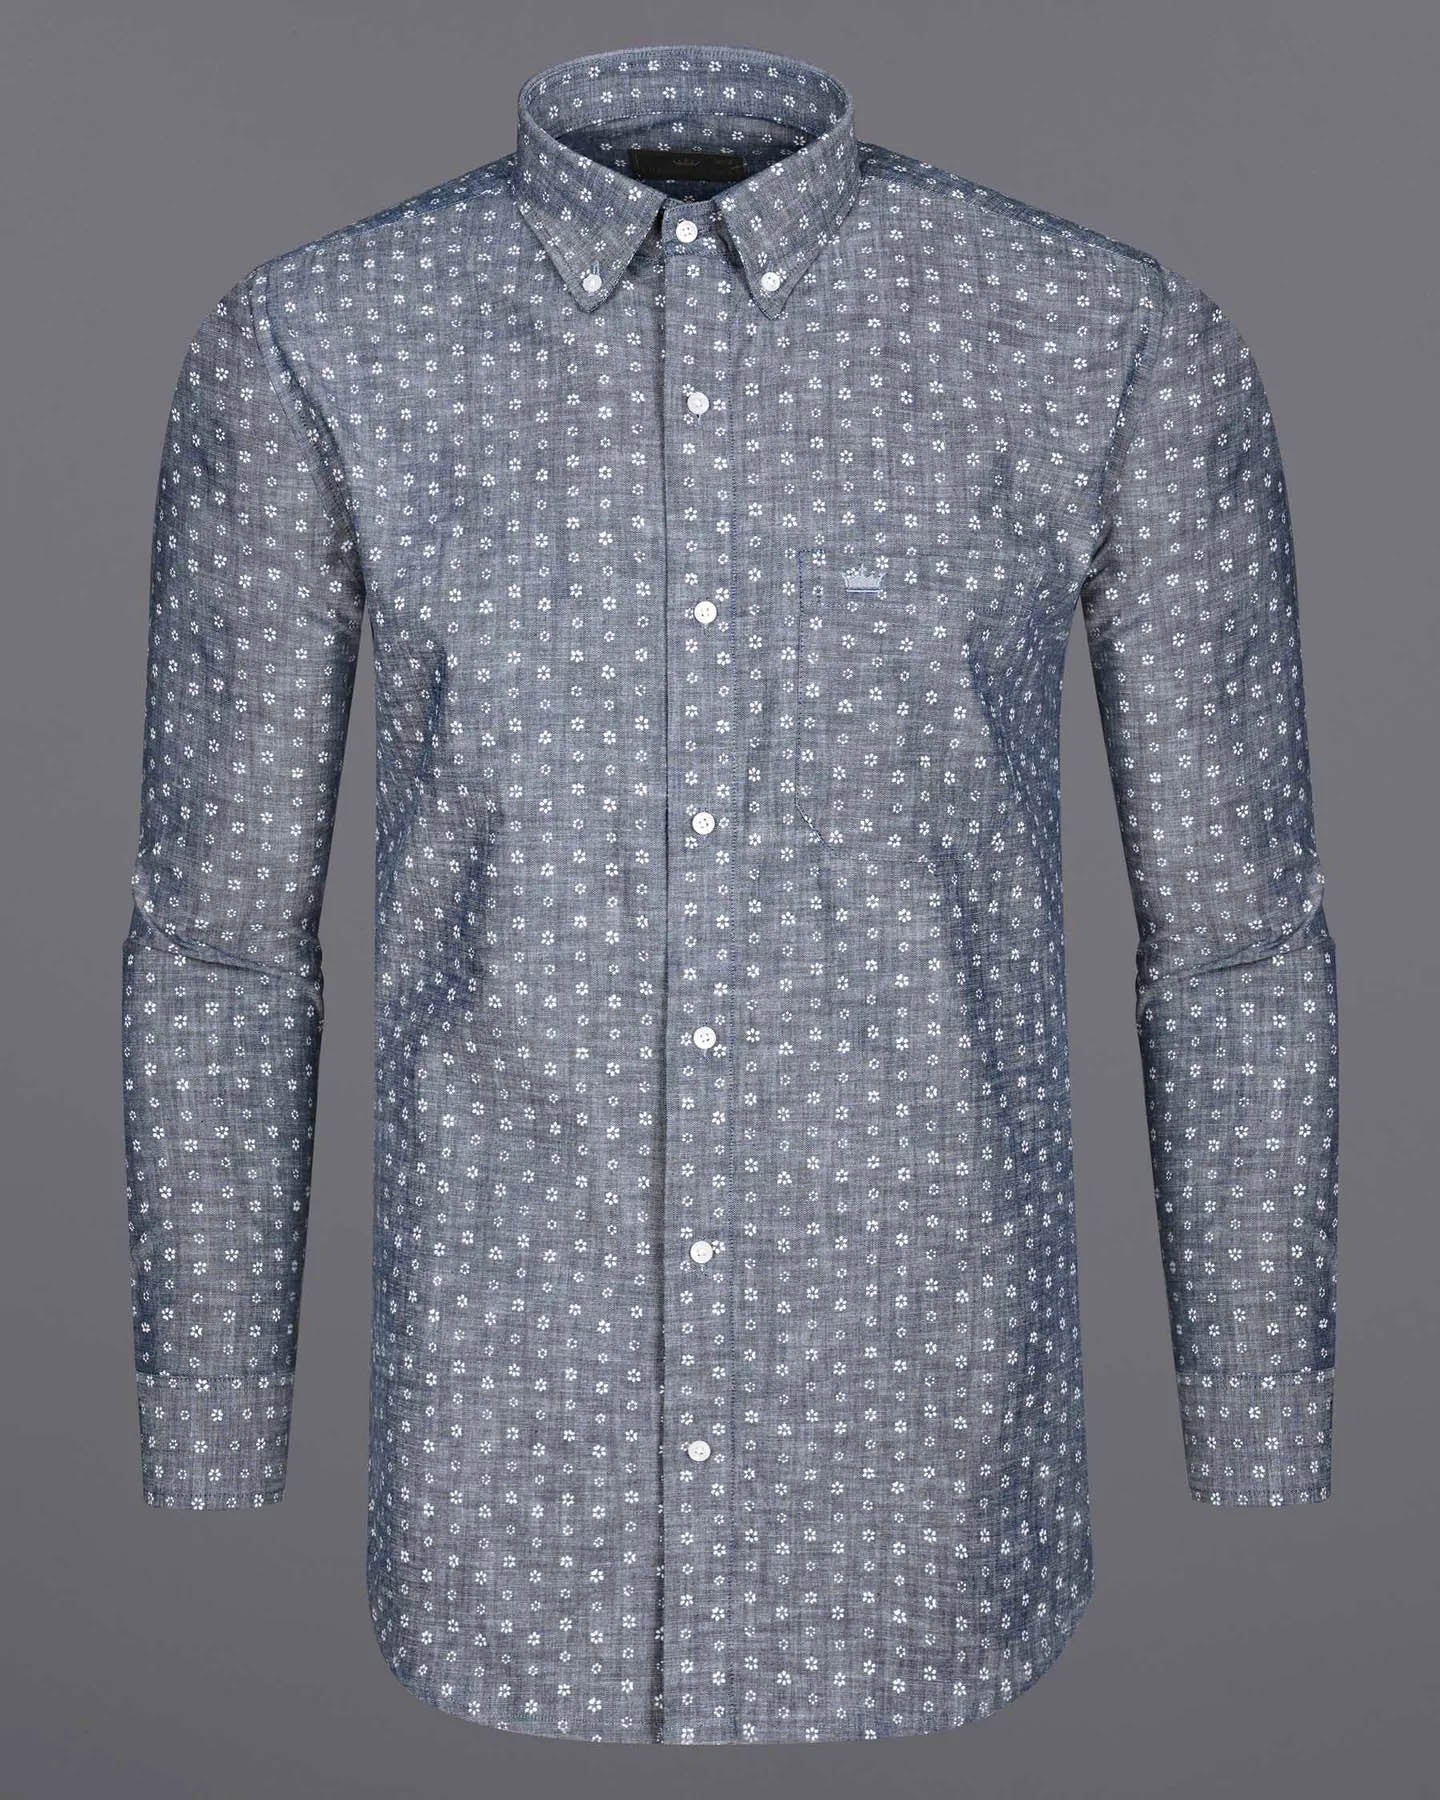 East Bay Gray Ditzy Floral Printed Chambray Premium Cotton Shirt 7984-BD-38, 7984-BD-H-38, 7984-BD-39, 7984-BD-H-39, 7984-BD-40, 7984-BD-H-40, 7984-BD-42, 7984-BD-H-42, 7984-BD-44, 7984-BD-H-44, 7984-BD-46, 7984-BD-H-46, 7984-BD-48, 7984-BD-H-48, 7984-BD-50, 7984-BD-H-50, 7984-BD-52, 7984-BD-H-52